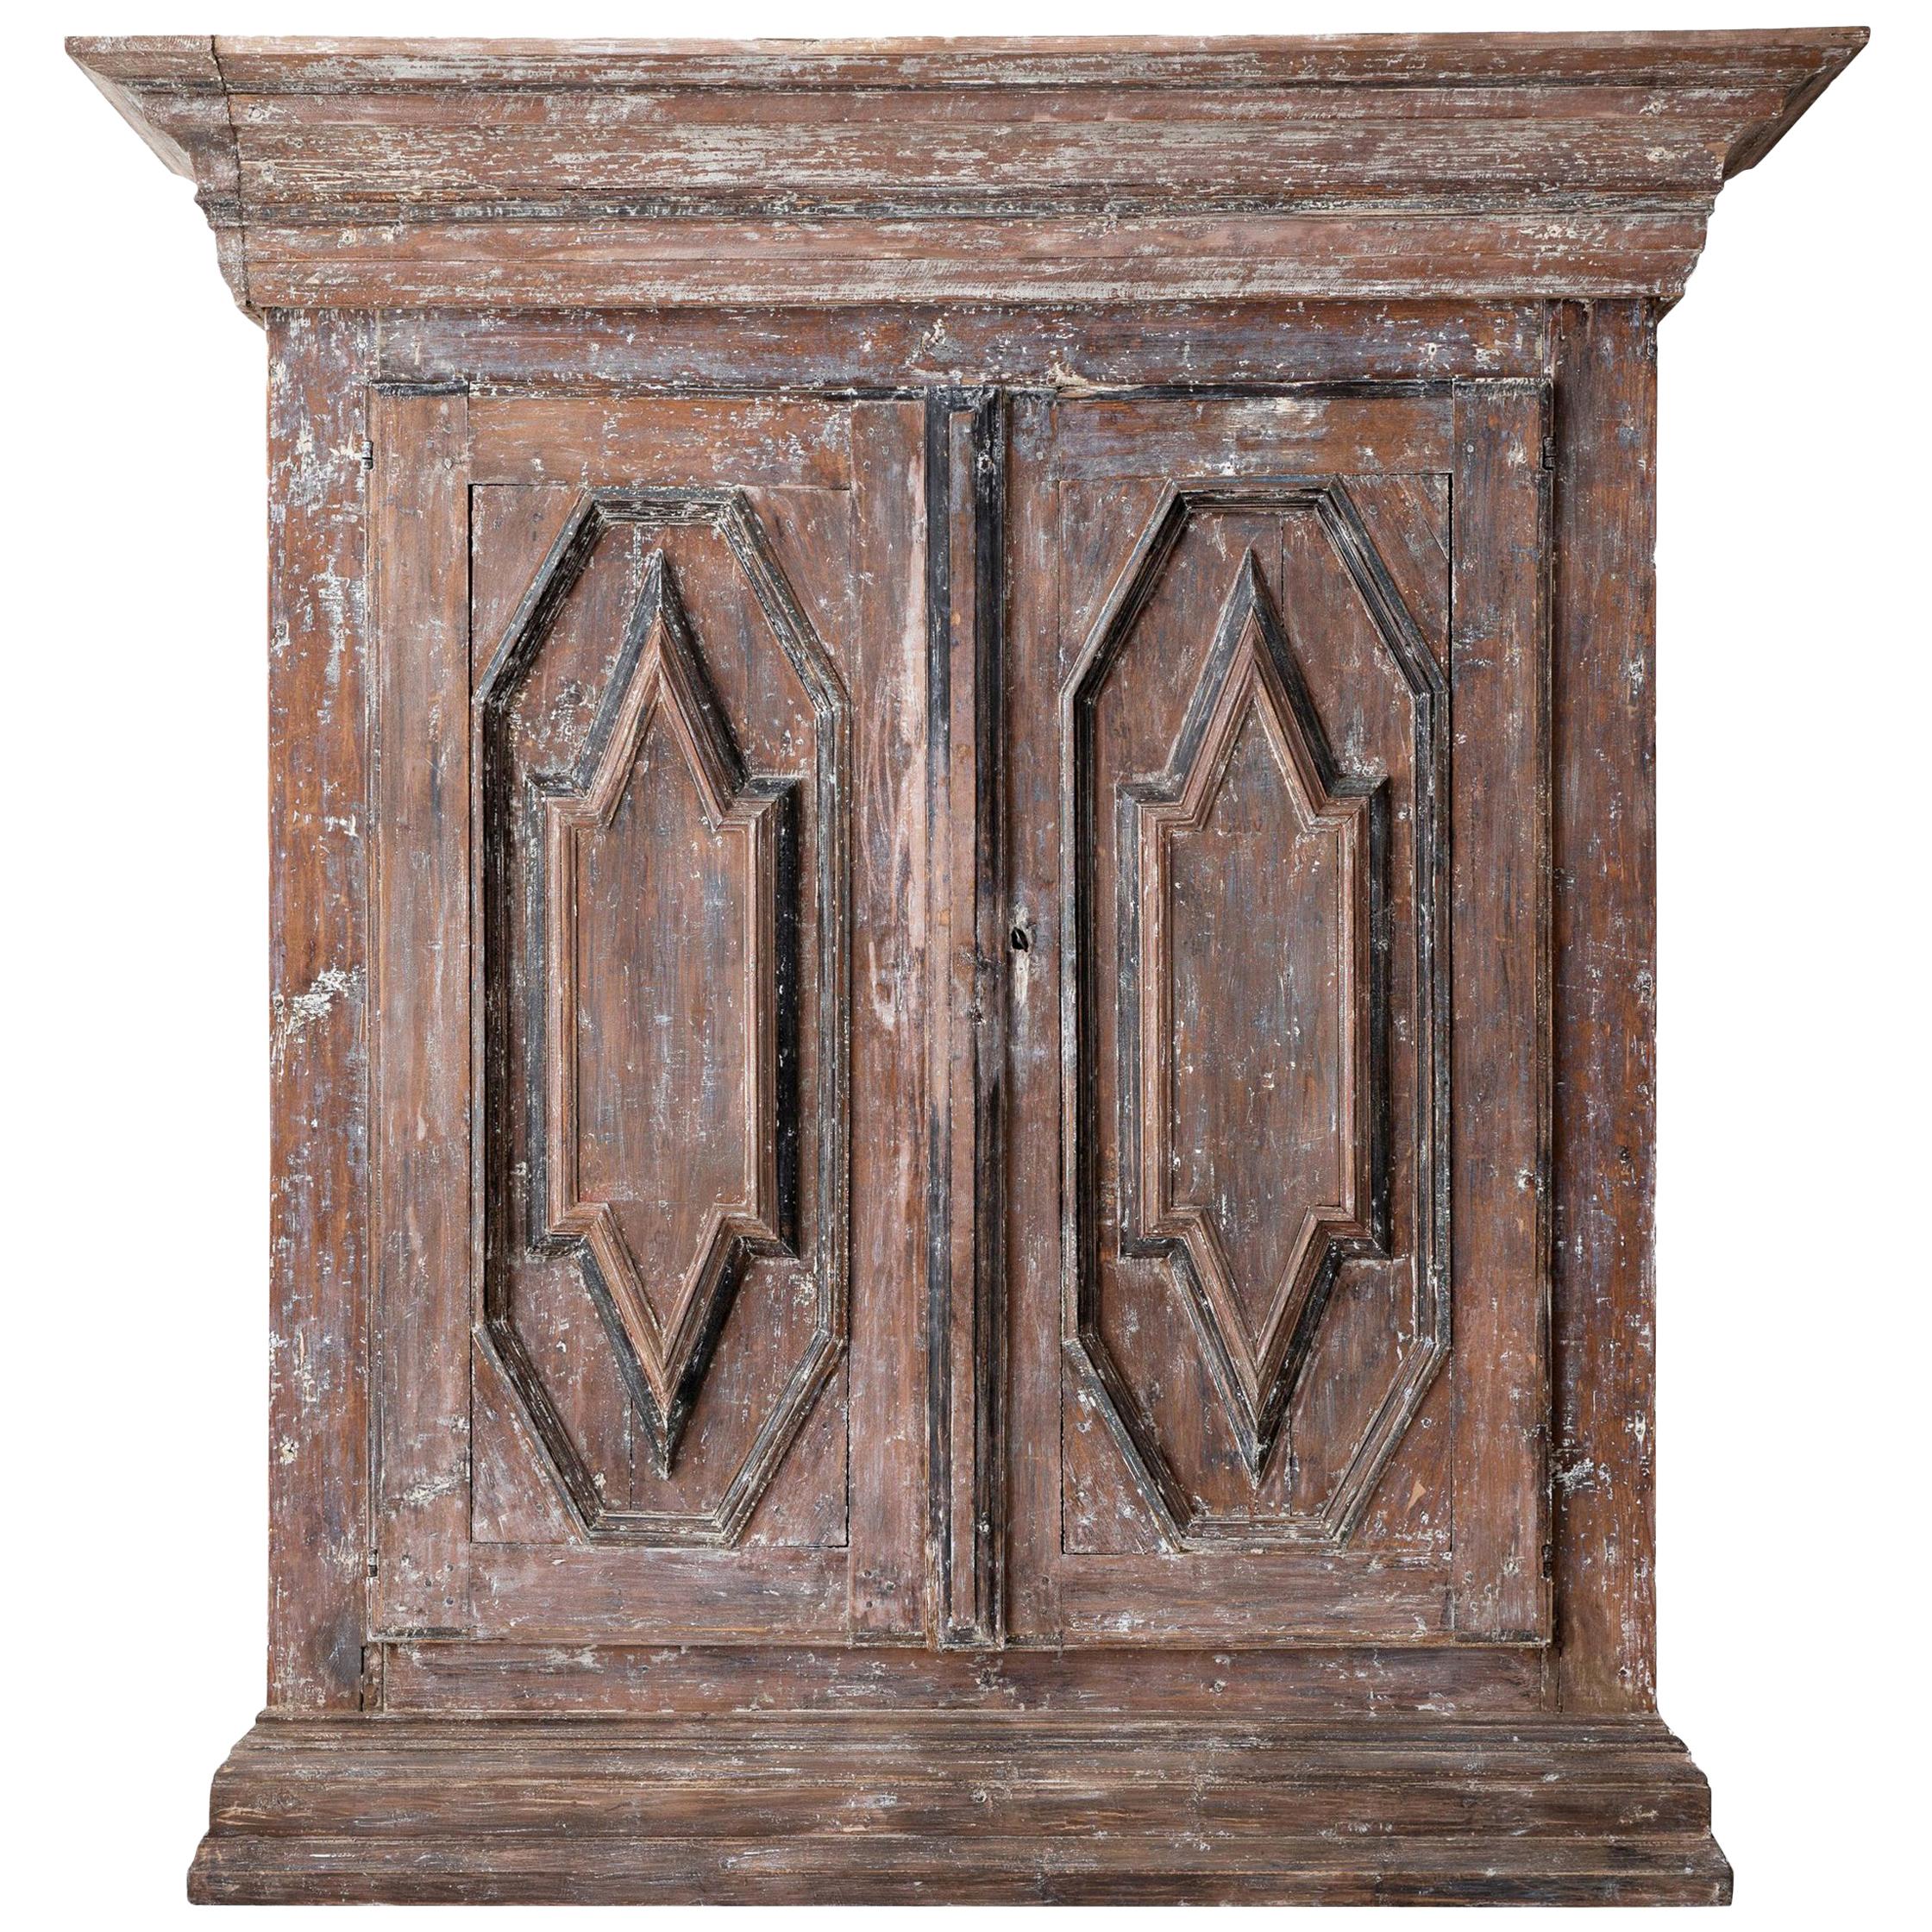 19th Century Northern European Baroque-Style Rustic Carved Armoire Cabinet